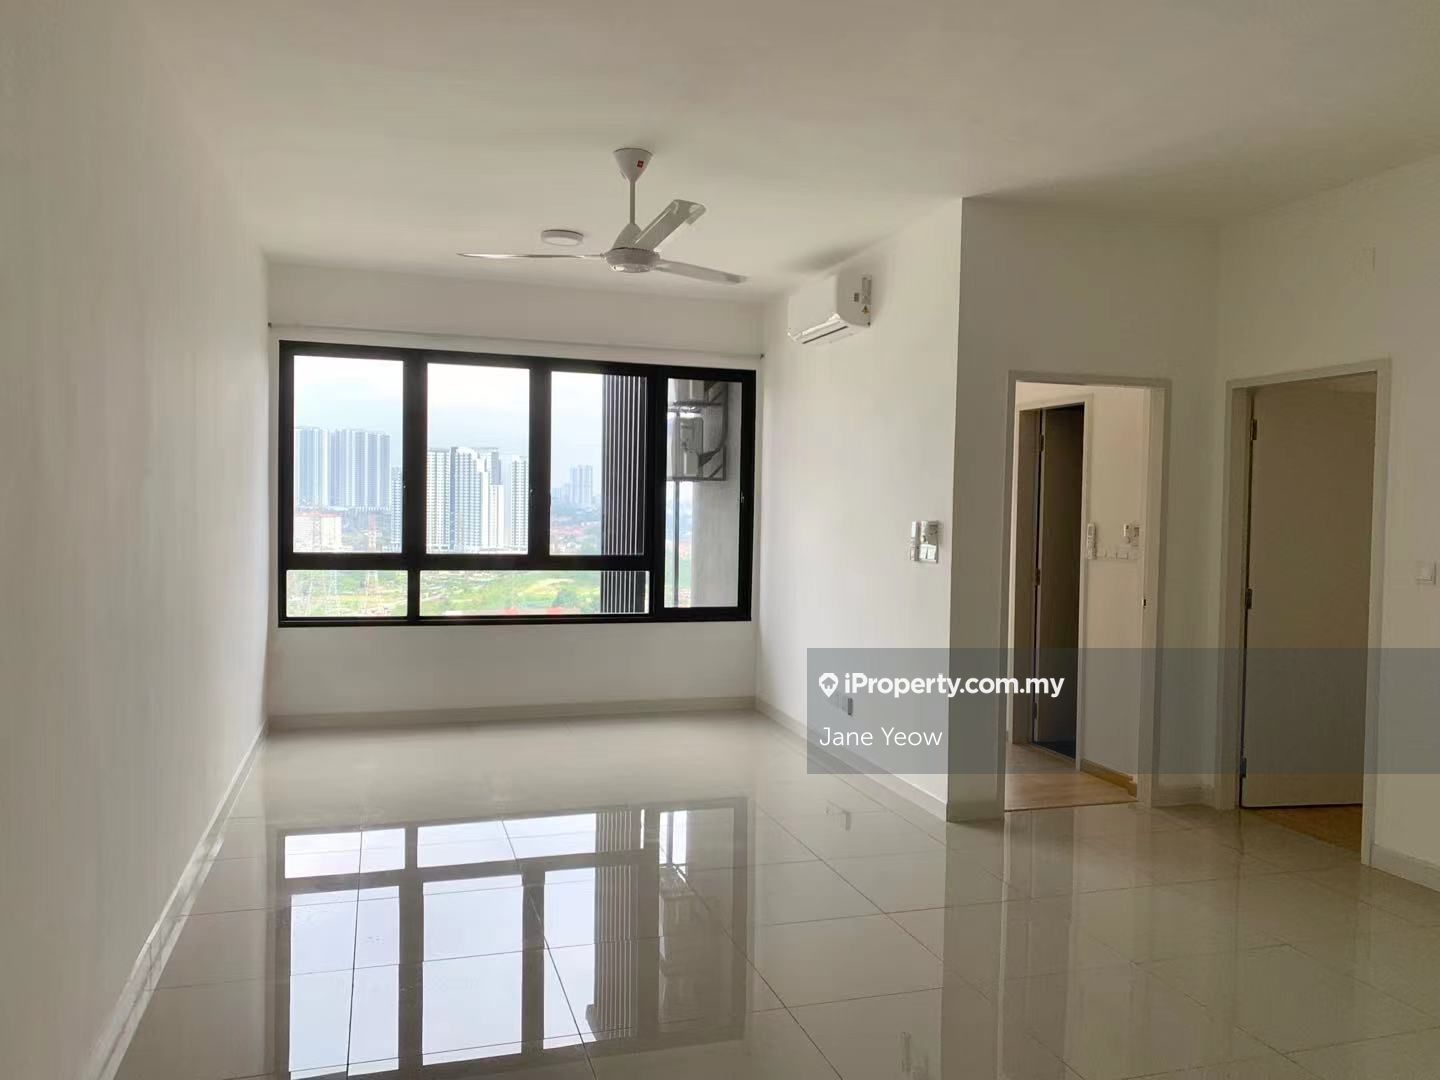 Tuan Residency Serviced Residence 3 bedrooms for sale in Jalan Kuching ...